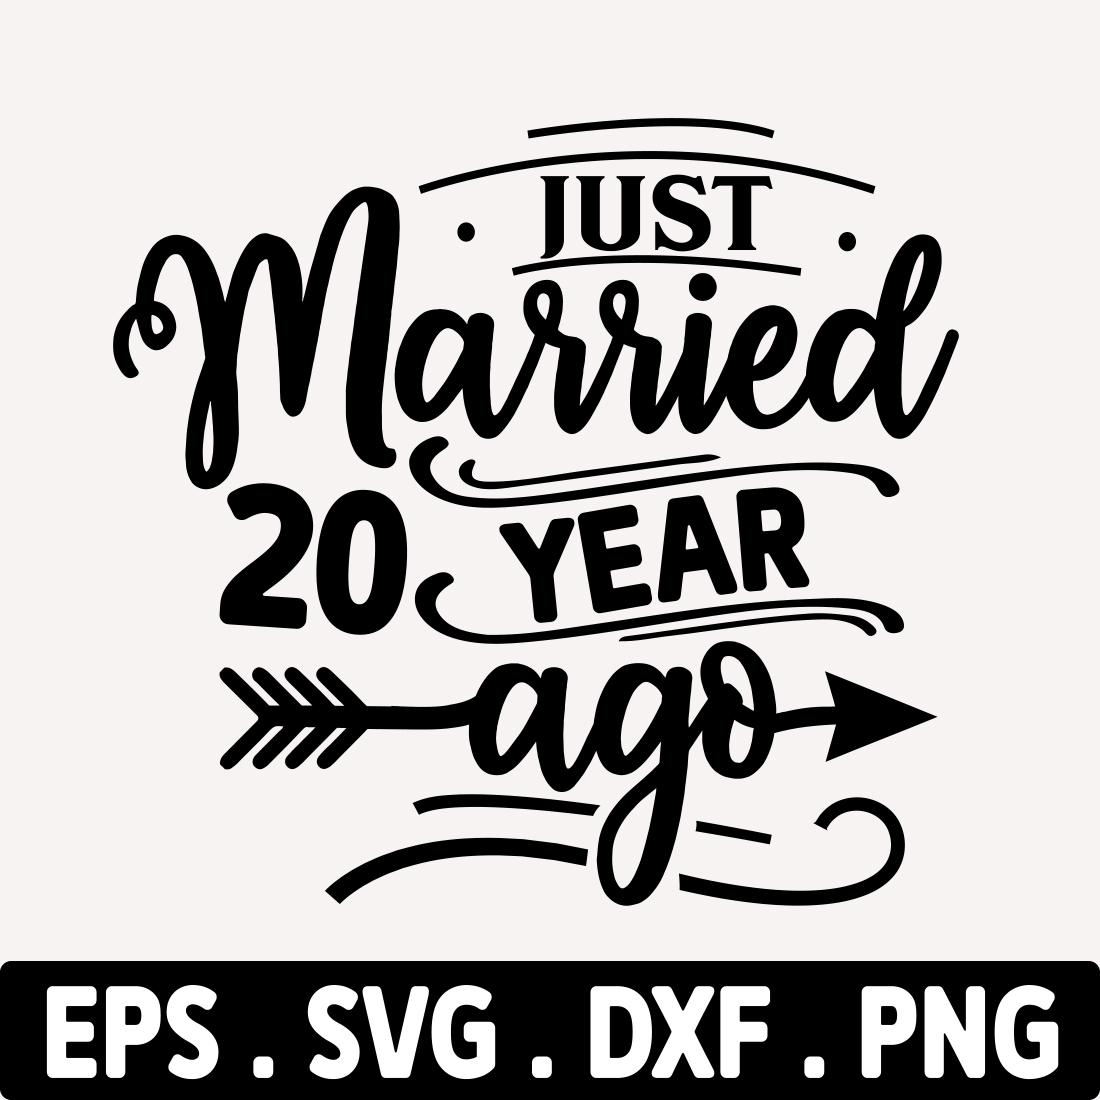 just married 20 years ago1 476